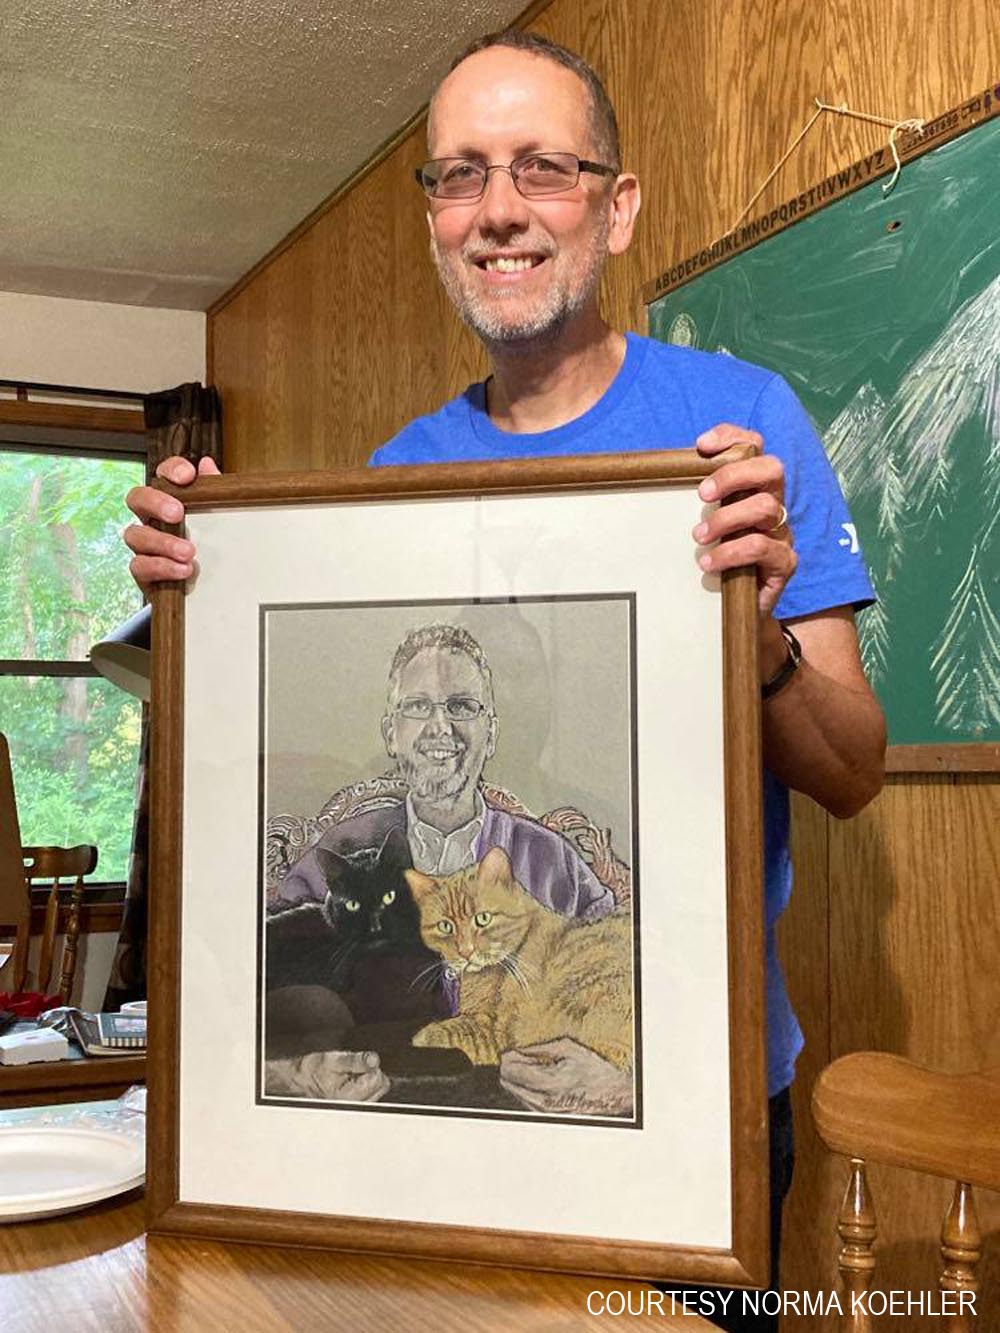 Keith with his portrait.